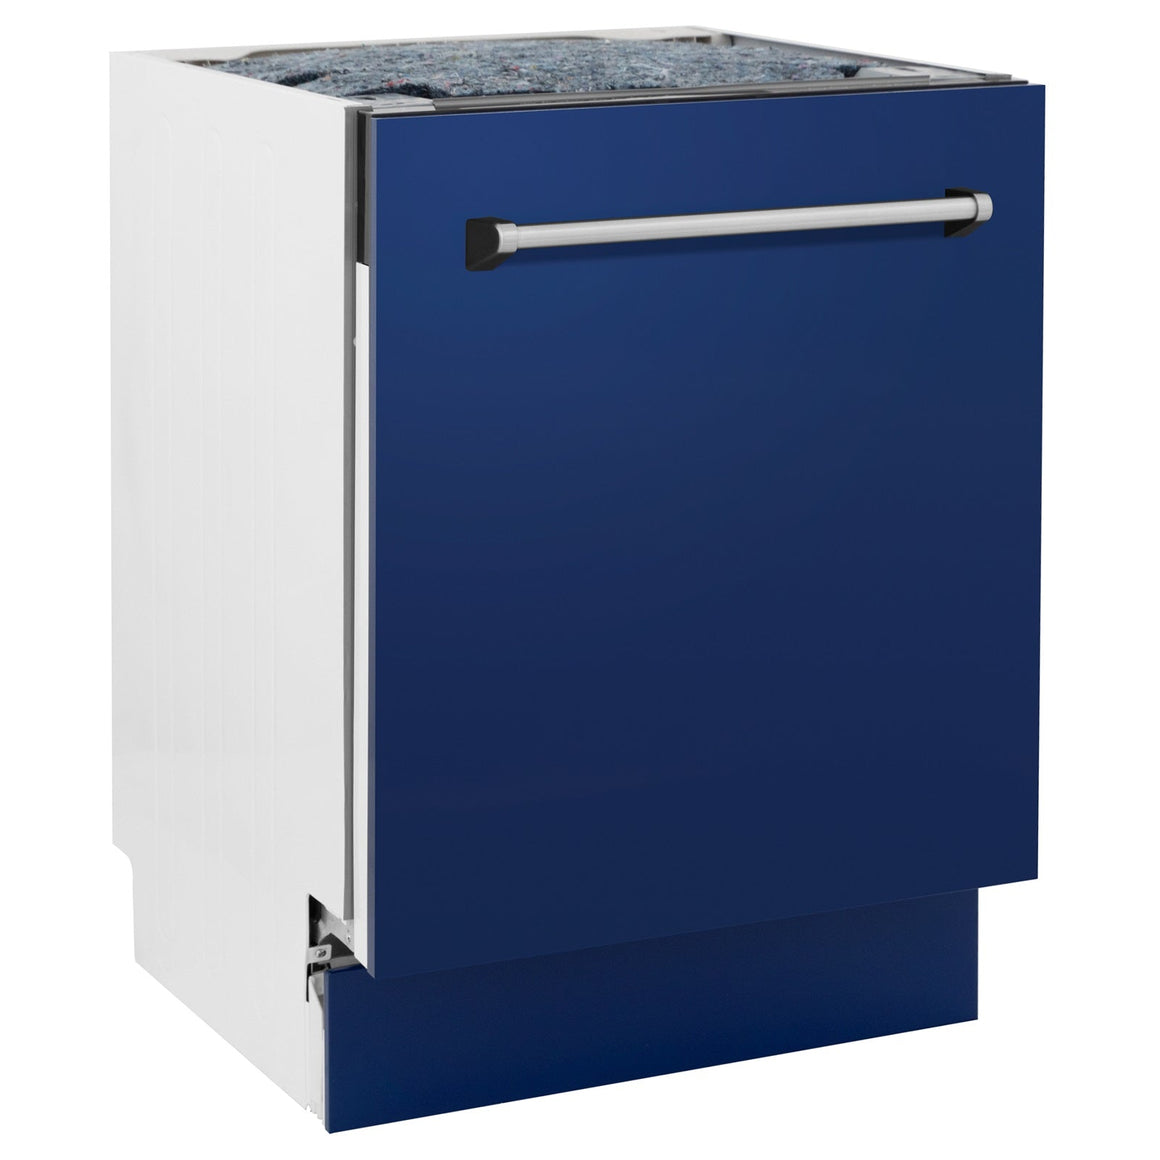 24" Top Control Tall Tub Dishwasher in Blue Matte with Stainless Steel Tub and 3rd Rack (DWV-BM-24)